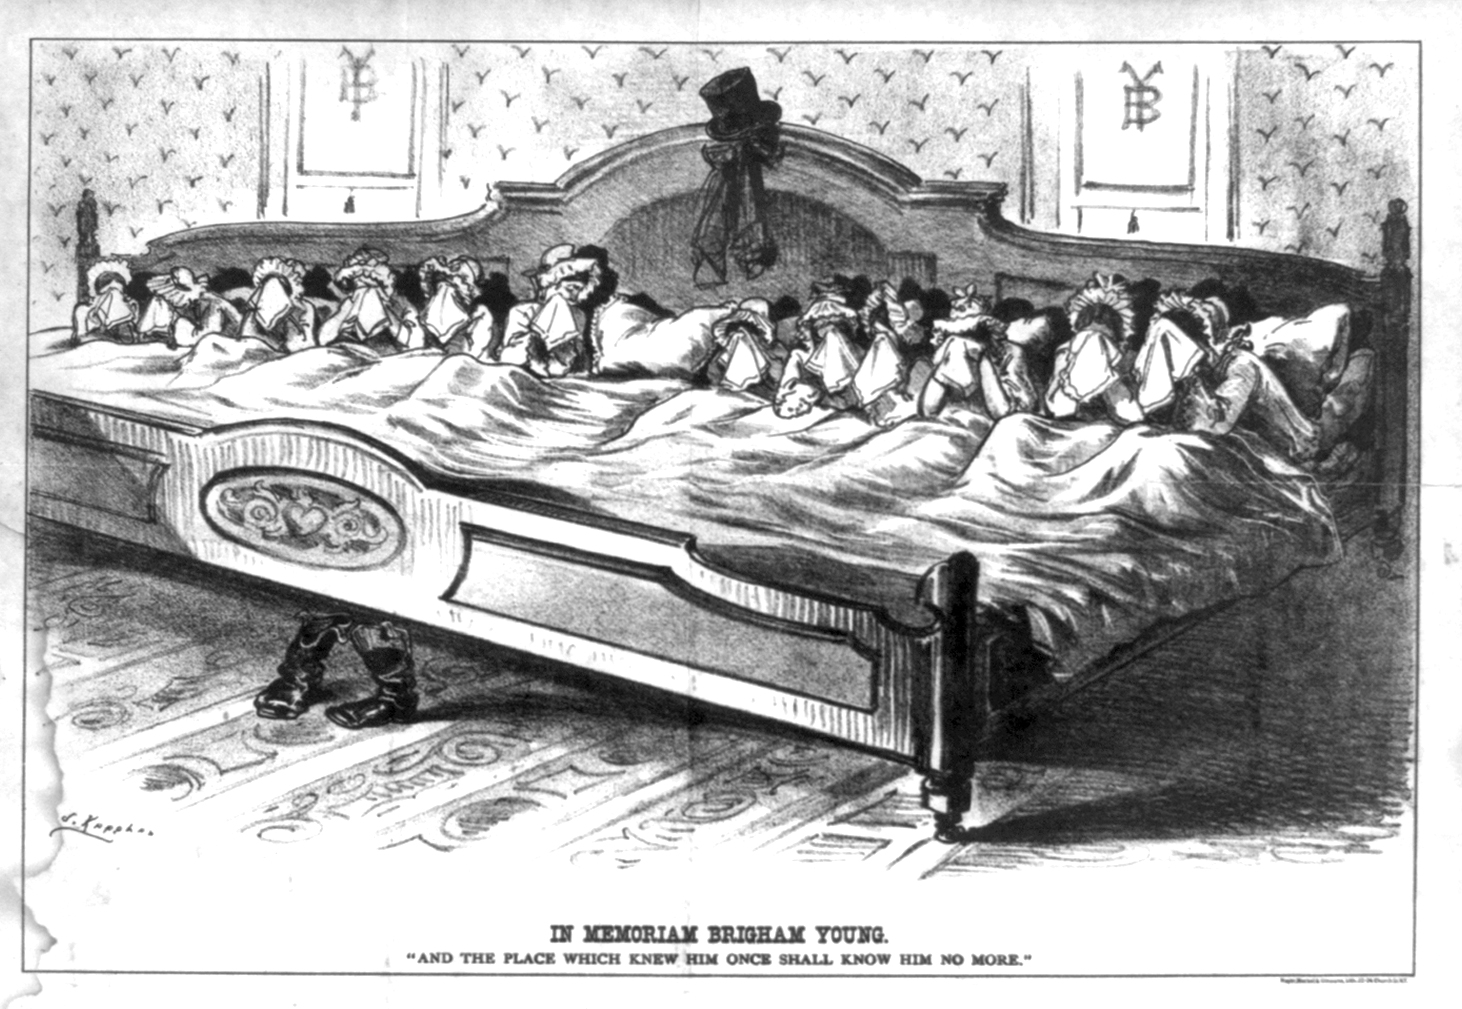 The intensity of anti-Mormon sentiment in the U.S. is well illustrated in this political cartoon from 1877 published at the death of Brigham Young. The picture shows a wide bed with an empty spot in the middle; many women in the bed are crying. The caption reads, 'In Memoriam Brigham Young: And the place which knew him once shall know him no more.'